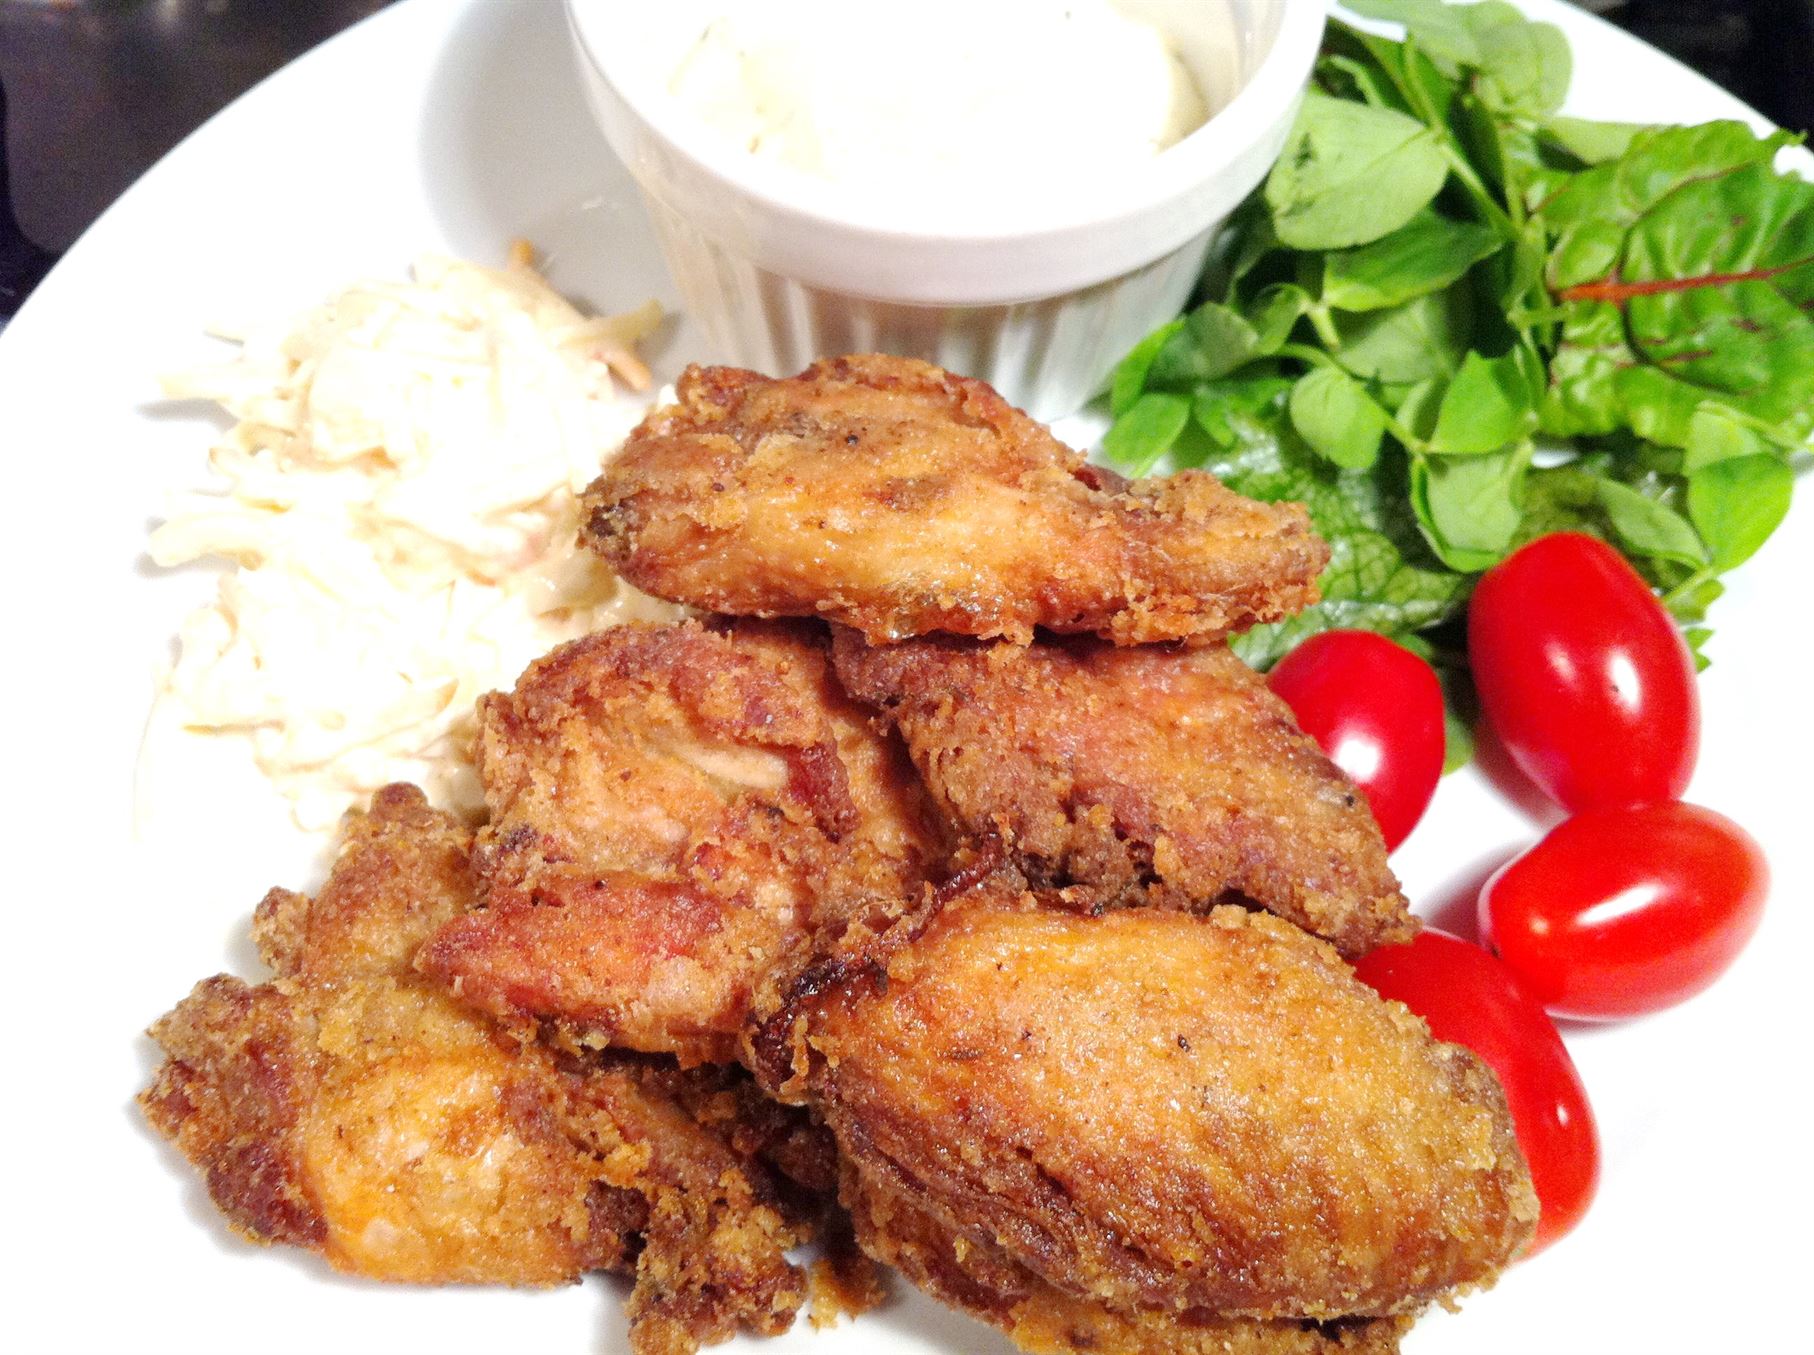 Boneless Chicken Wings with Blue Cheese Dip, Lay The Table